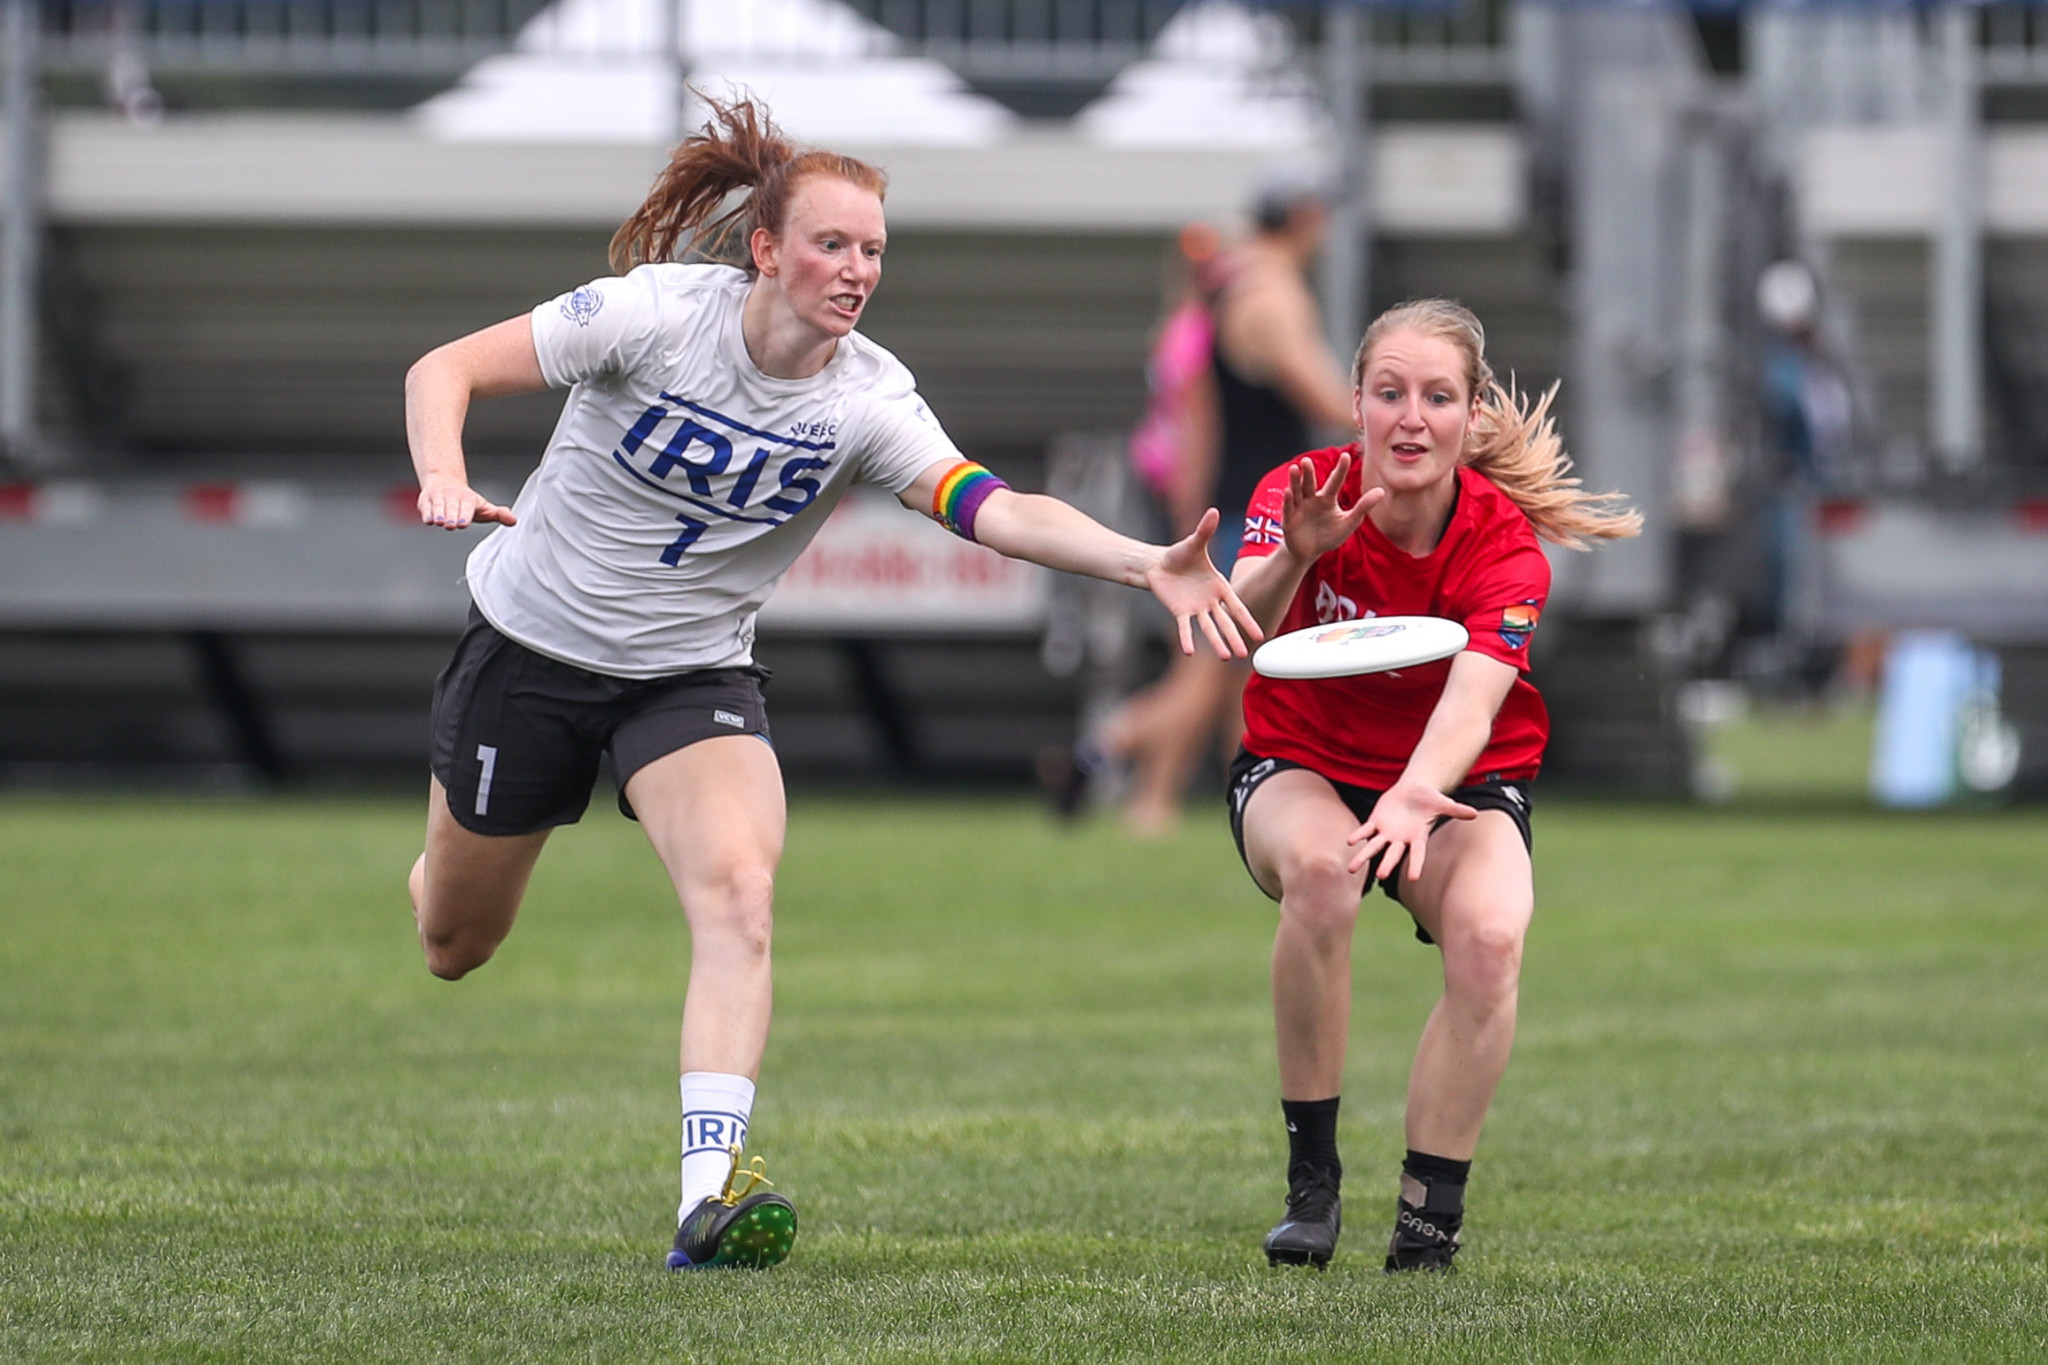 Iris bettered Bristol Women in their women's Pool B encounter at the World Ultimate Club Championships ©Paul Rutherford for UltiPhotos